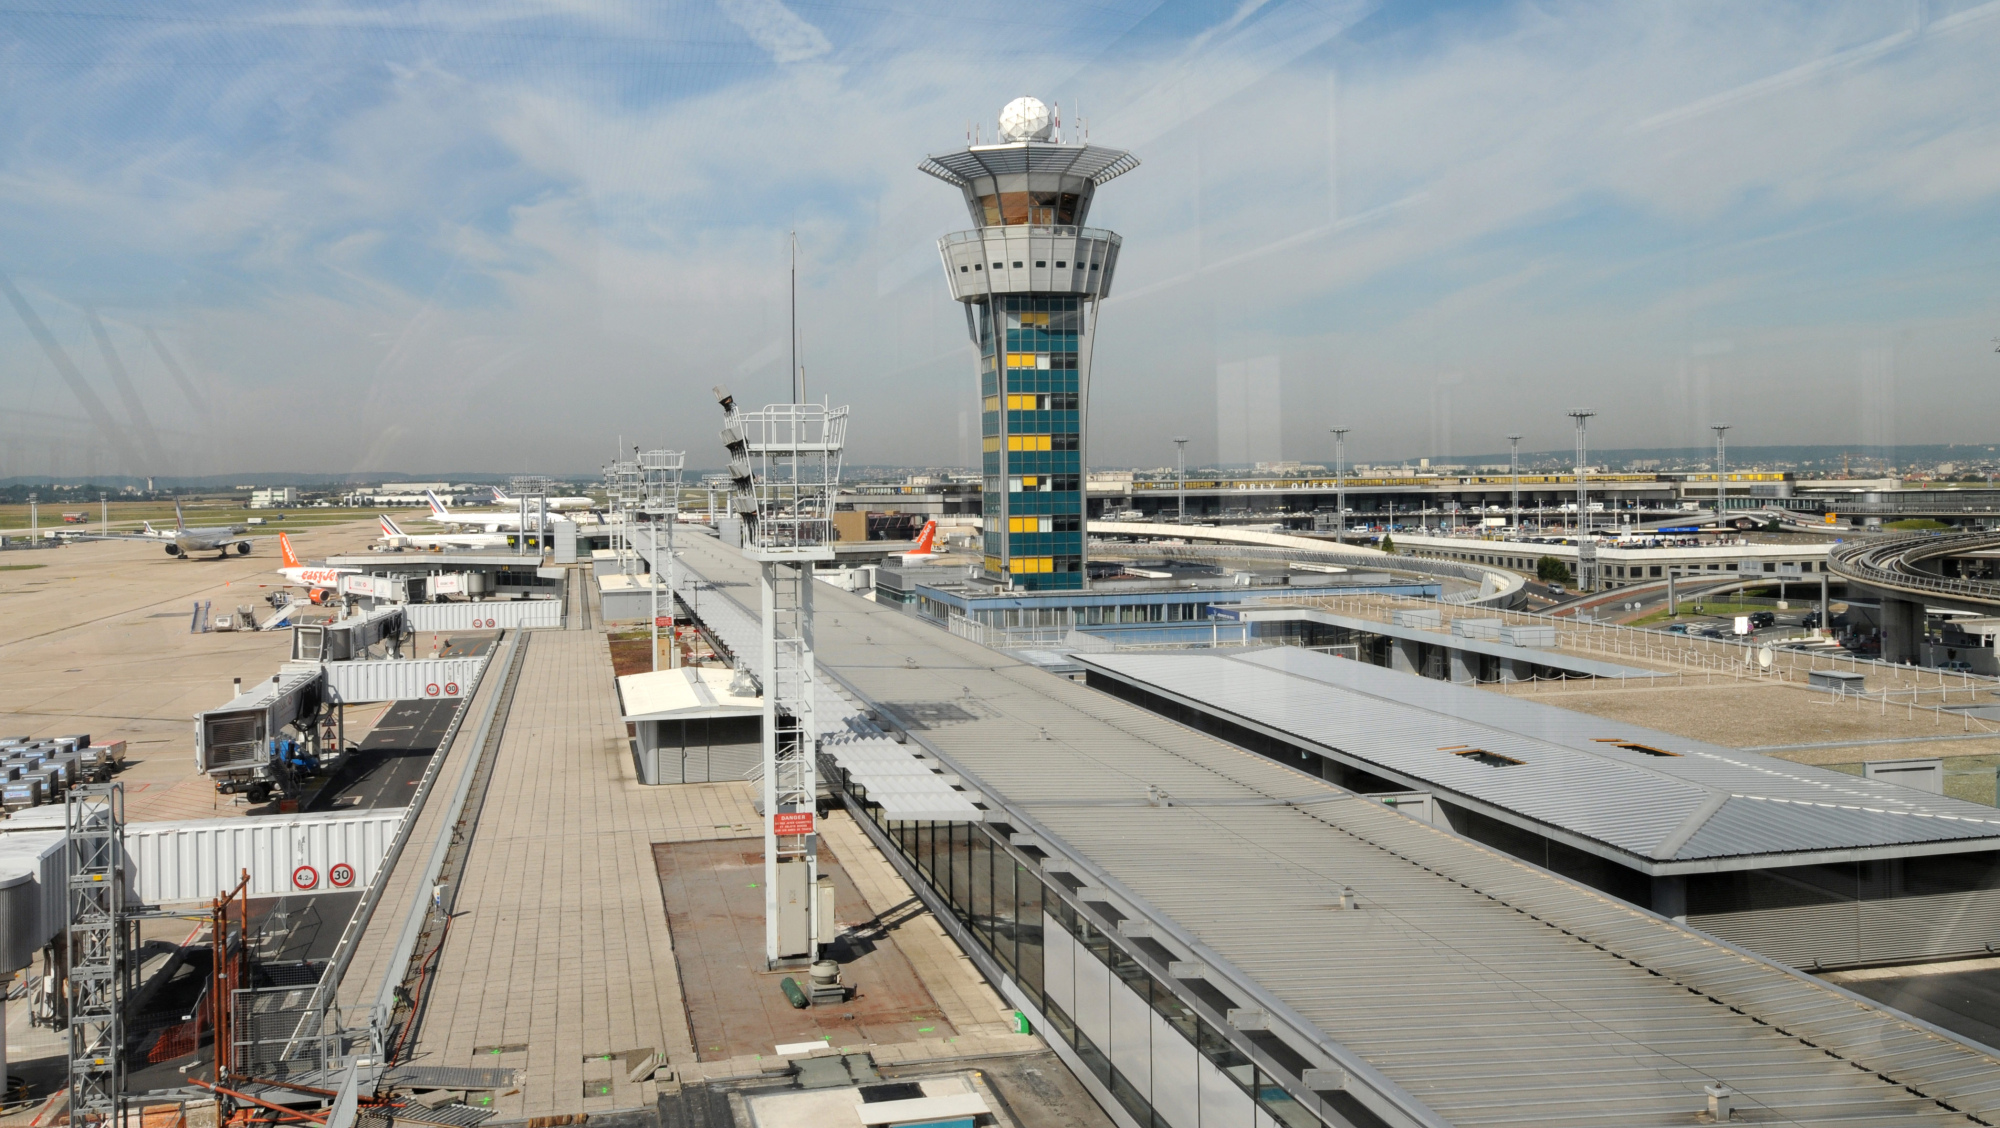 Level will progressively replace the ‘Open Skies’ brand and operate out of Paris’s Orly airport.